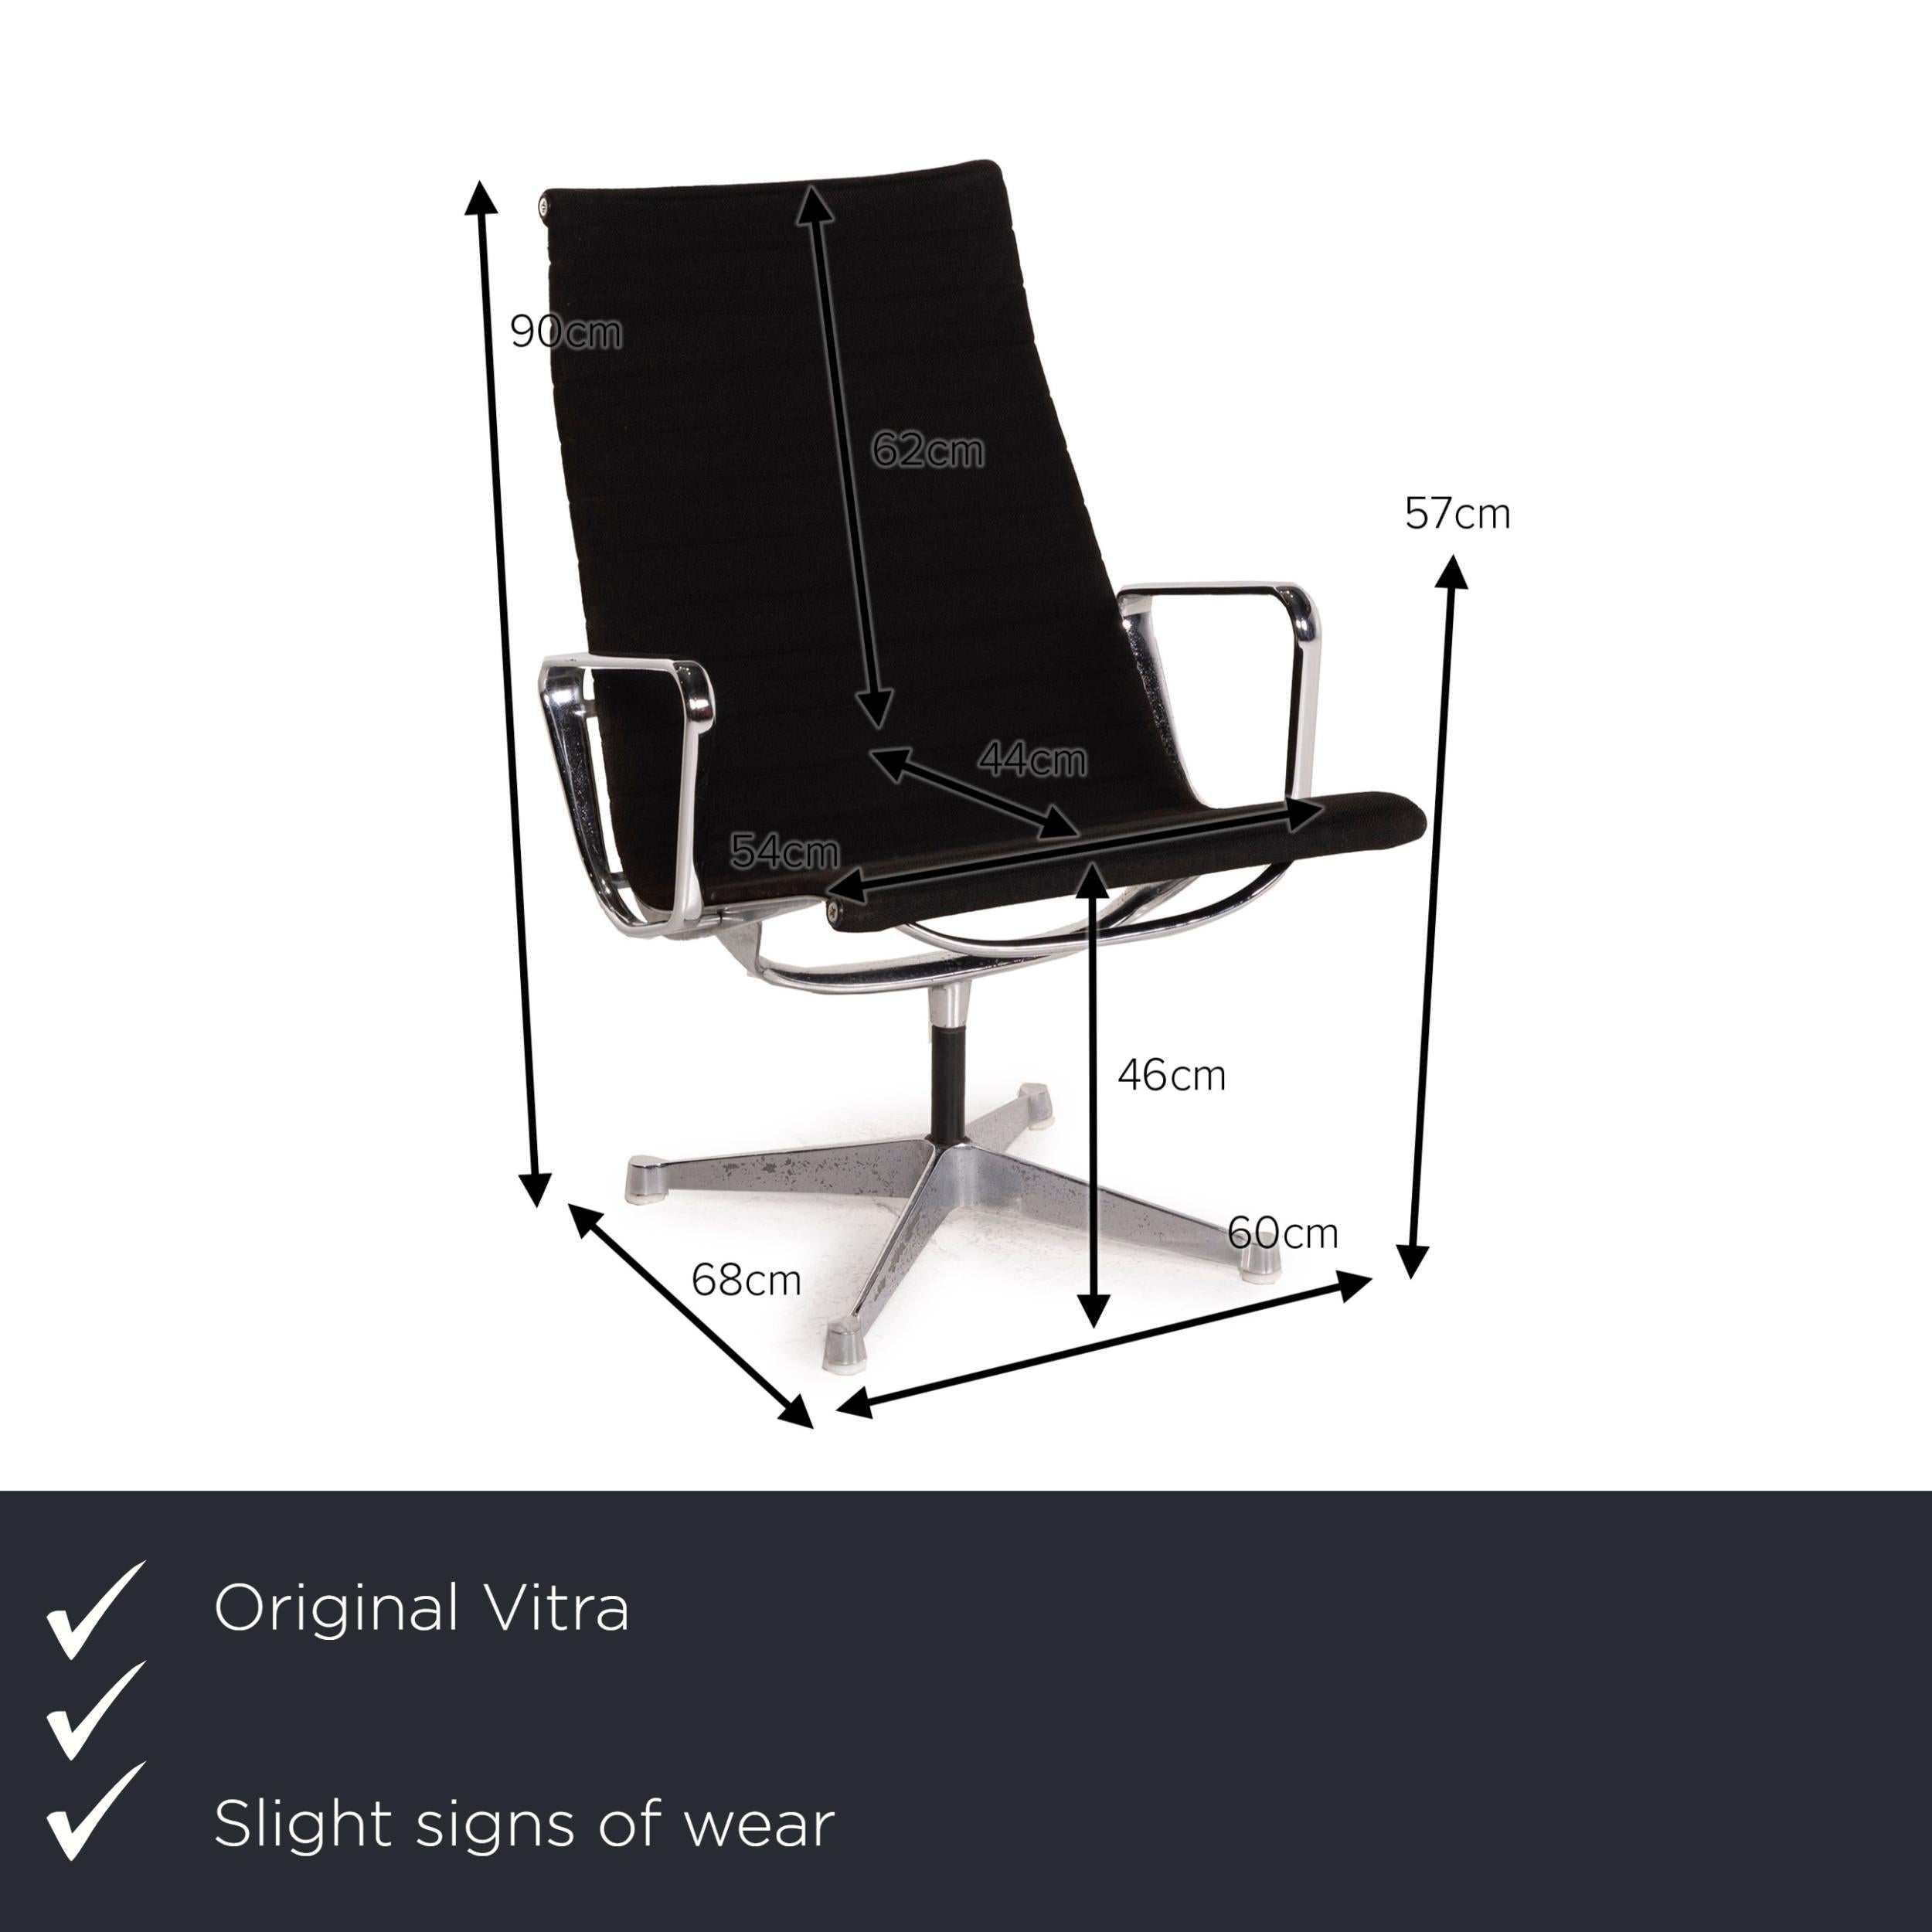 We present to you a Vitra fabric armchair black Hermann Miller aluminum chair.
  
 

 Product measurements in centimeters:
 

 depth: 68
 width: 60
 height: 90
 seat height: 46
 rest height: 57
 seat depth: 44
 seat width: 54
 back